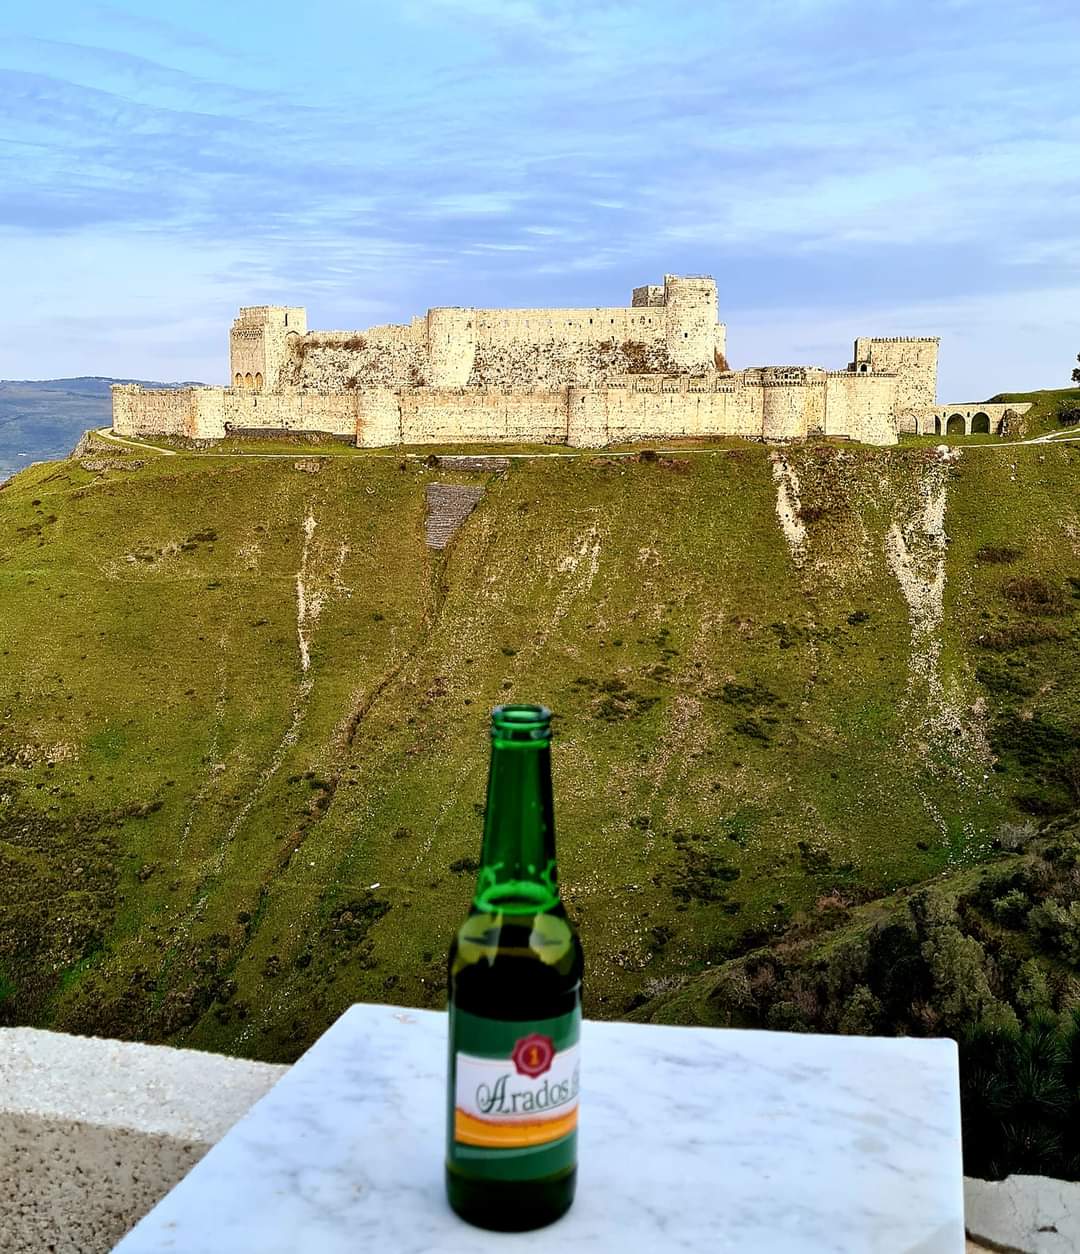 A beer with a view of Krak-des-Chevalier crusader castle